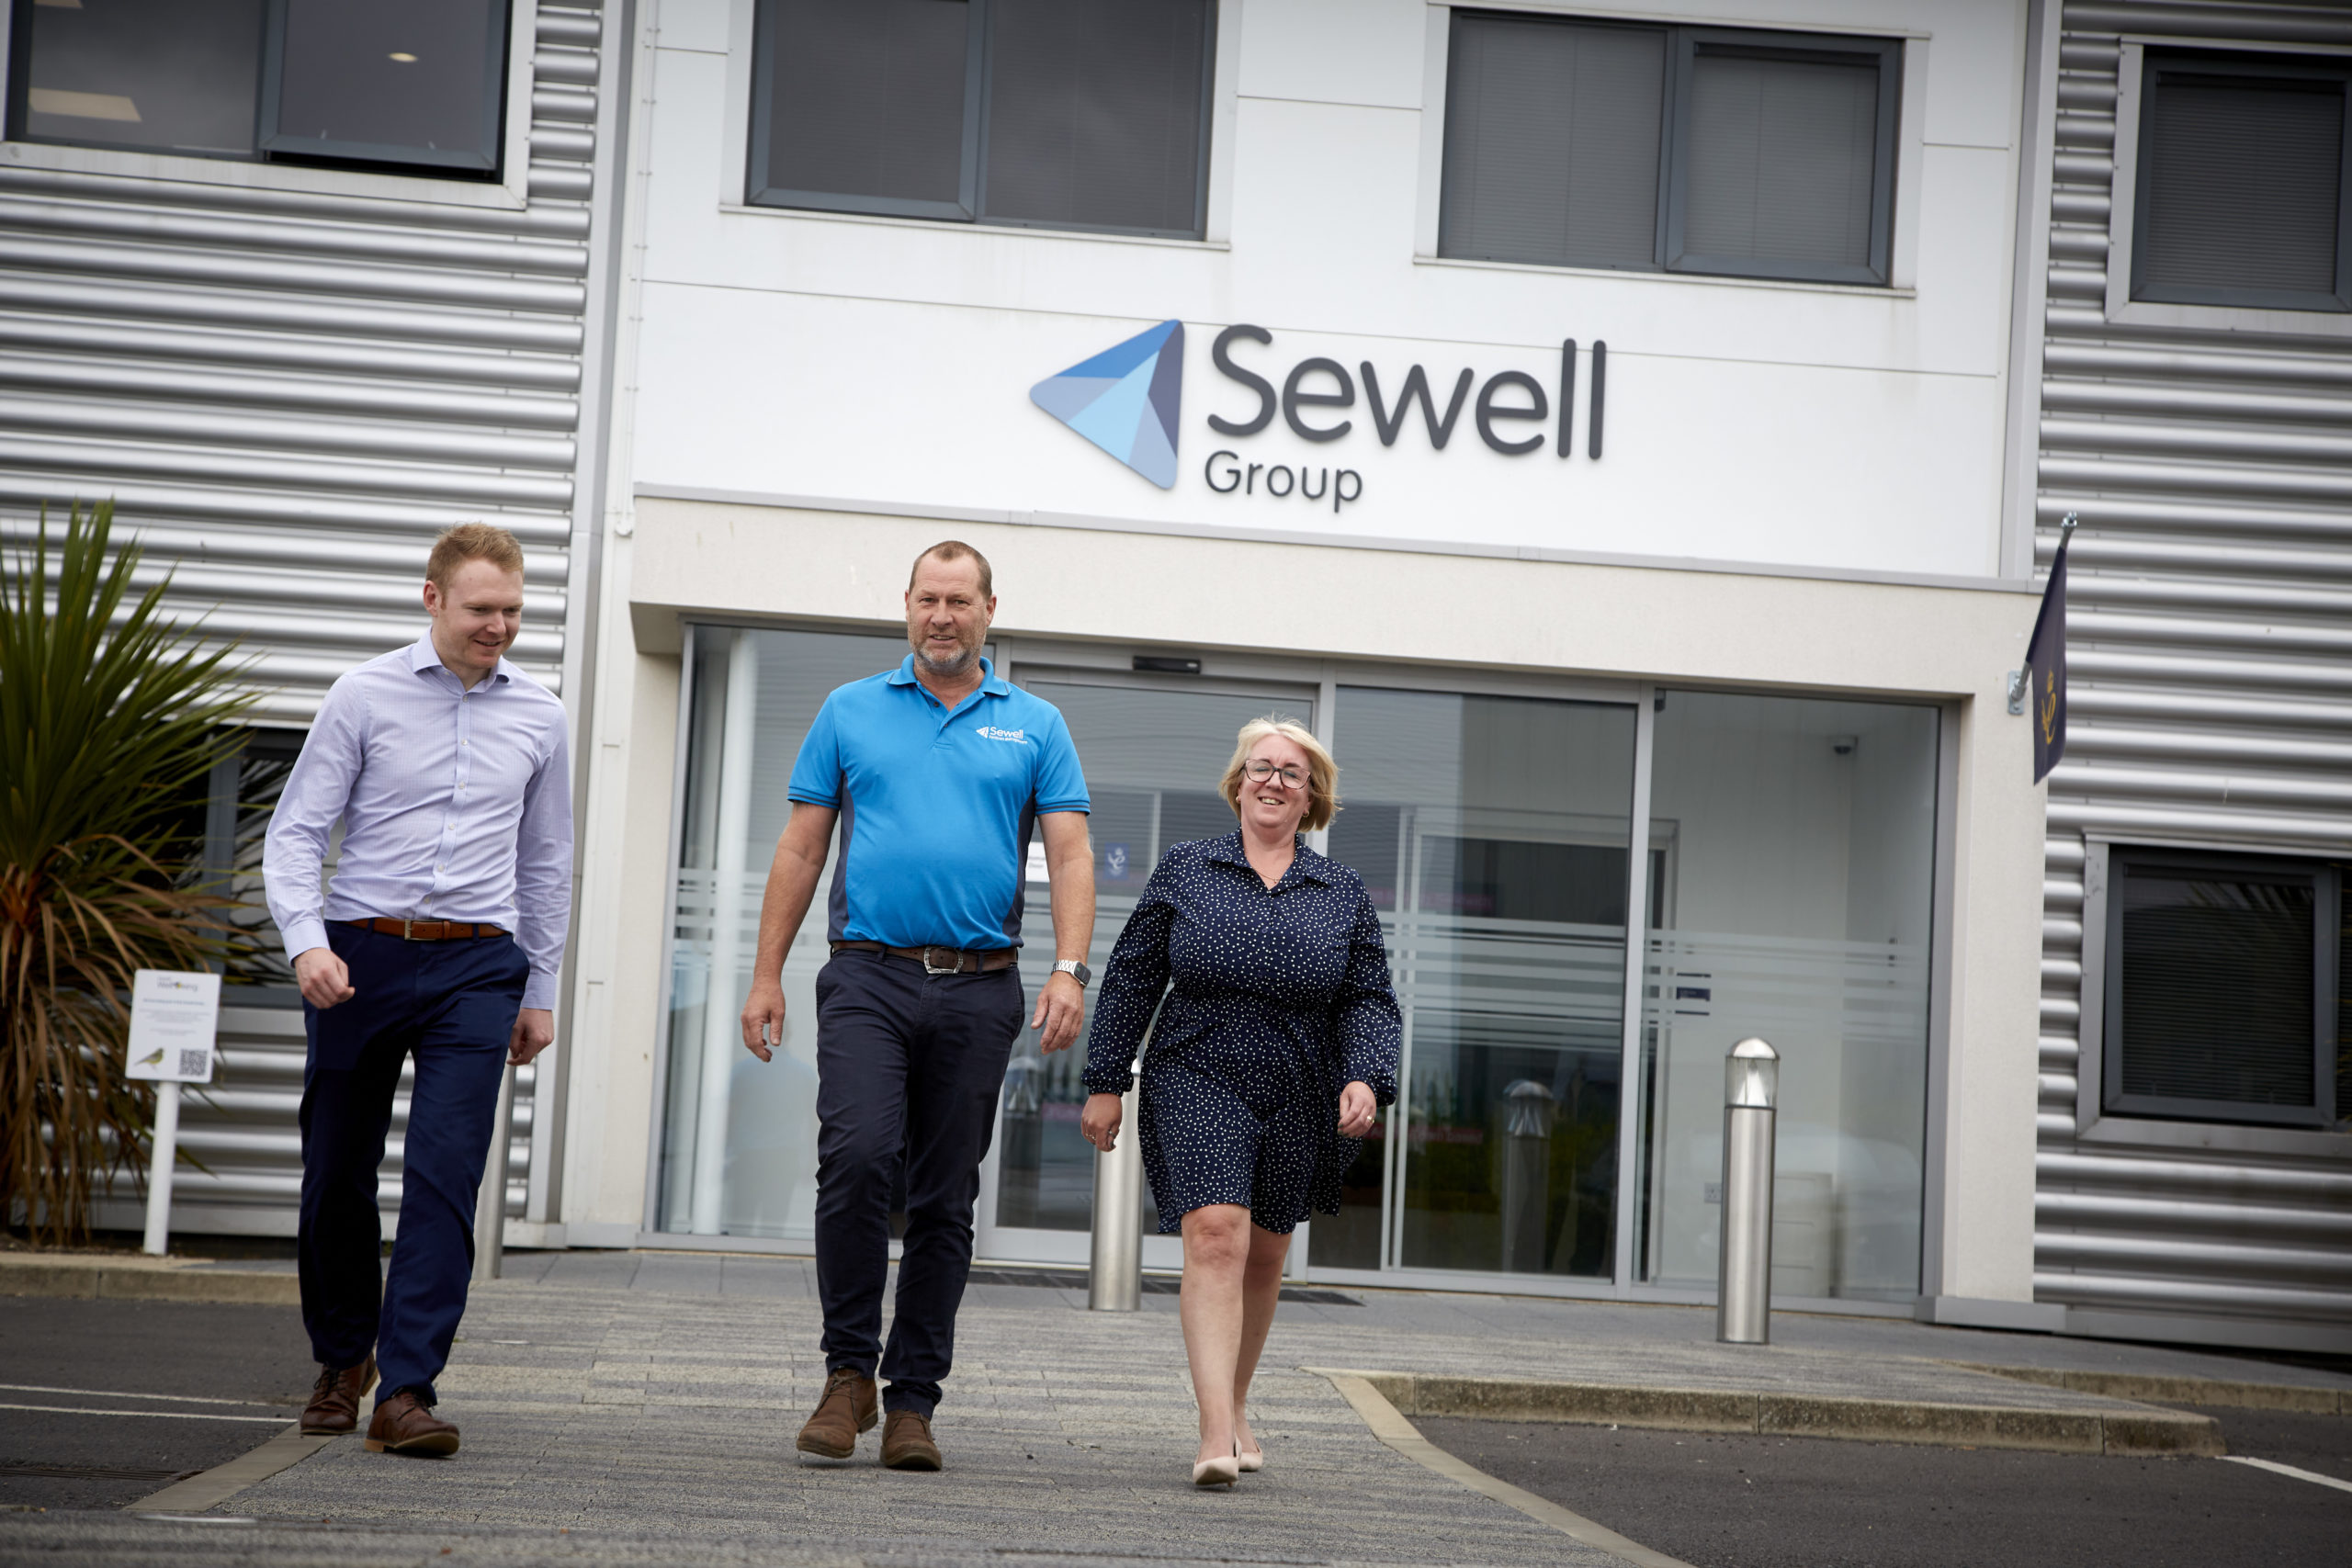 Sewell facilities management